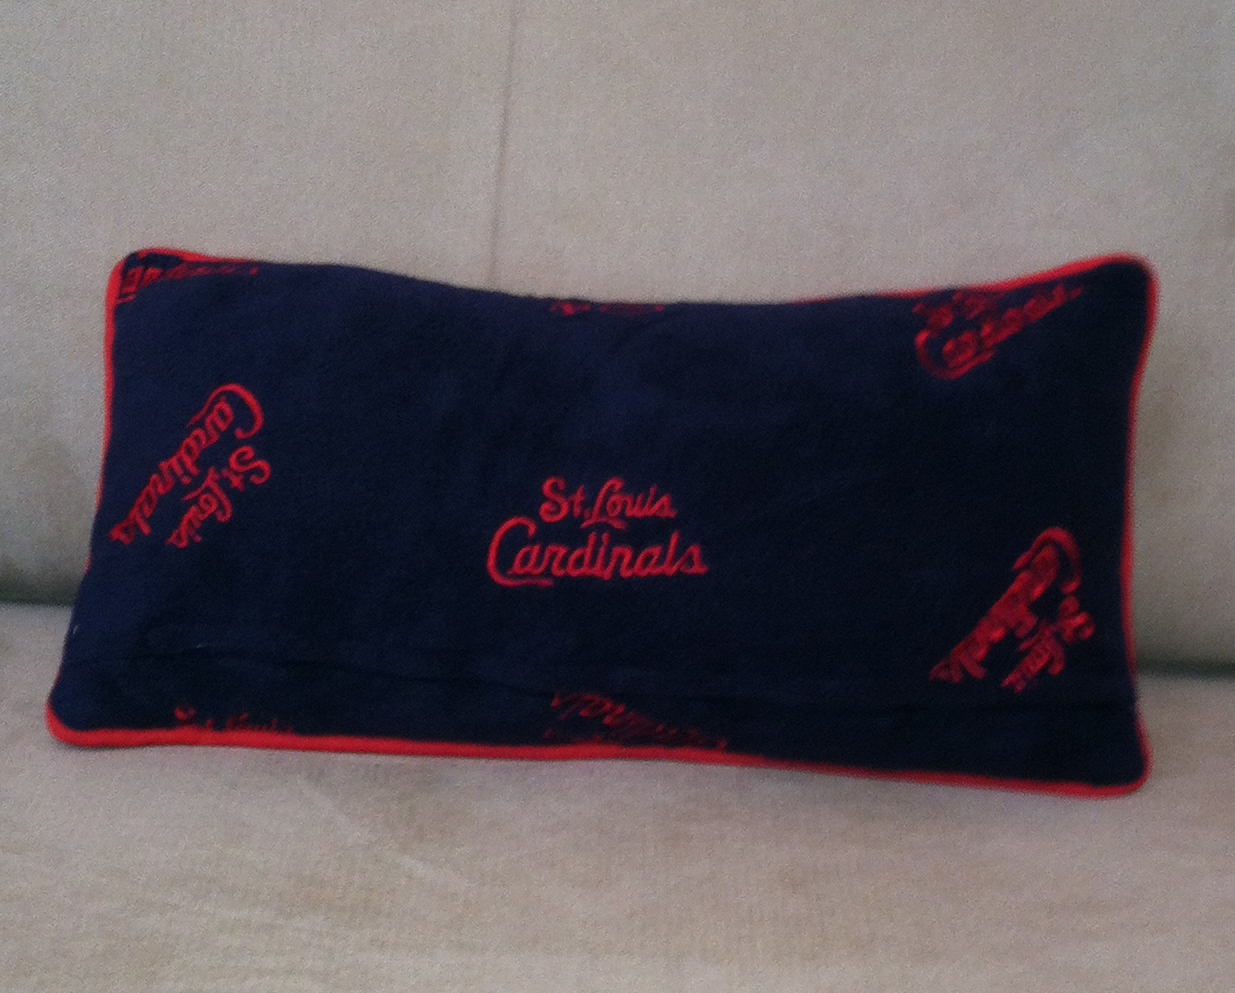 The Back of the Cardinals Rally Pillow